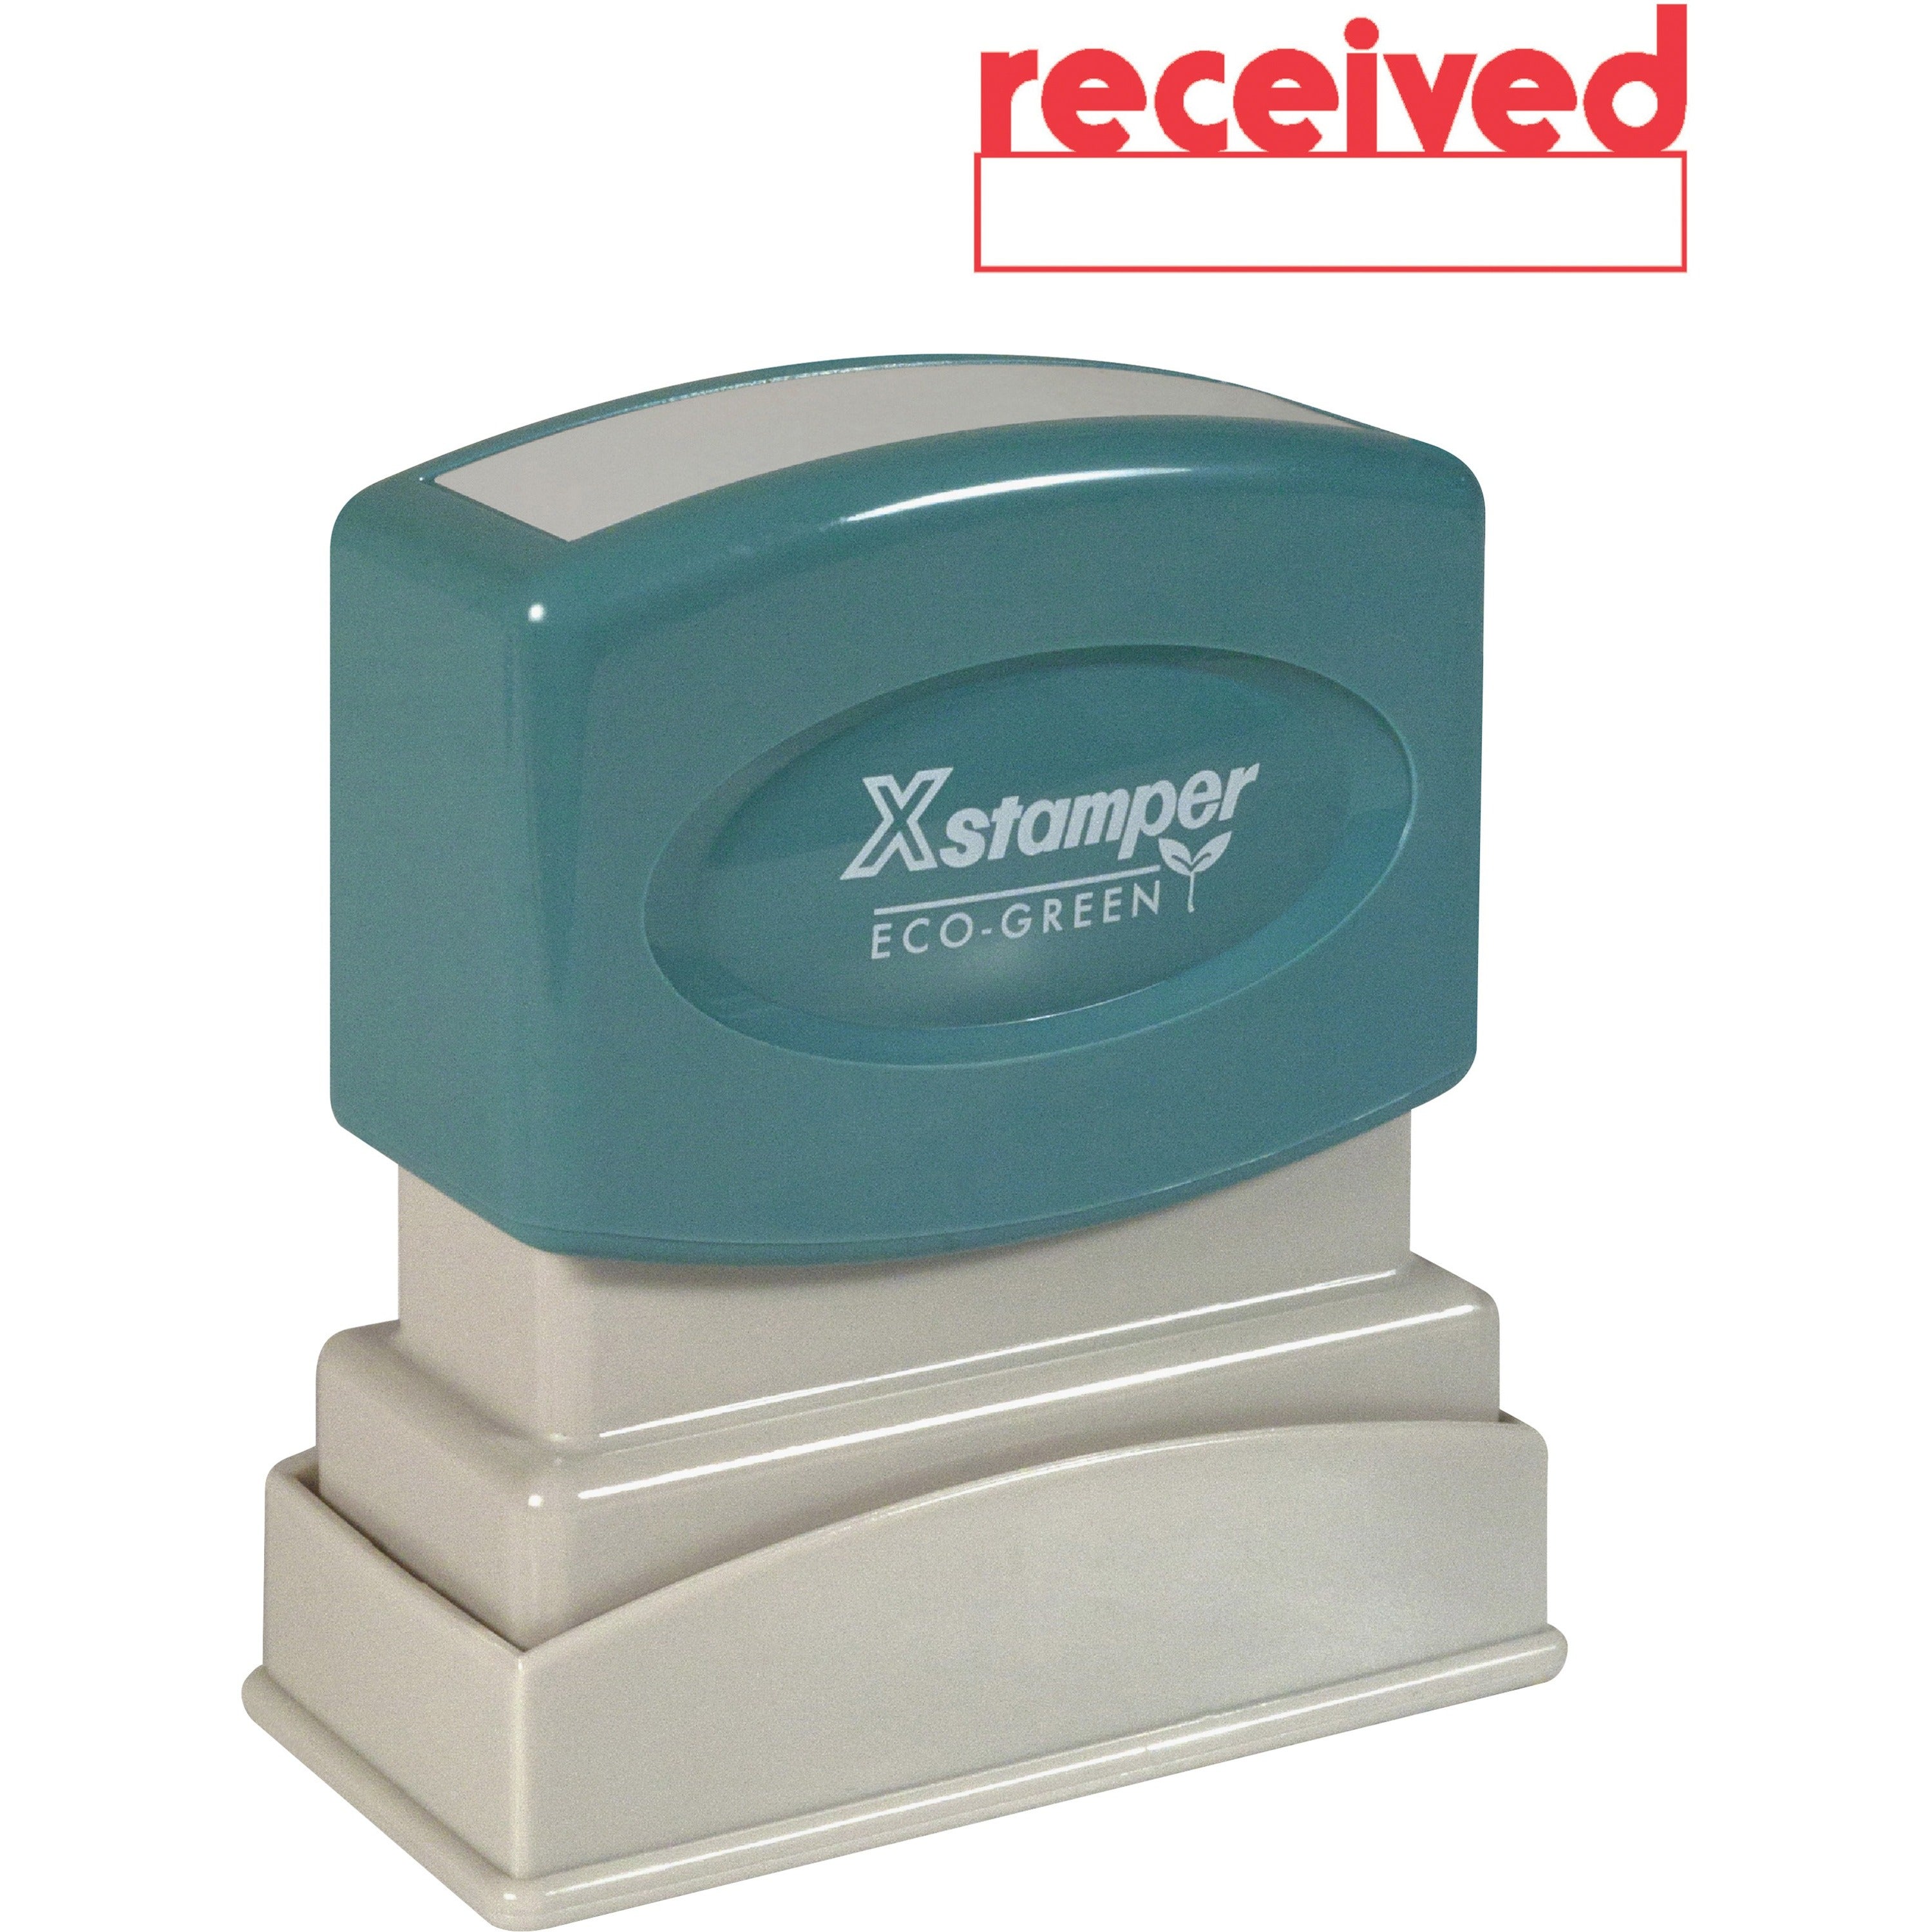 Xstamper RECEIVED Window Title Stamp - Message Stamp - "RECEIVED" - 0.50" Impression Width x 1.63" Impression Length - 100000 Impression(s) - Red - Recycled - 1 Each - 